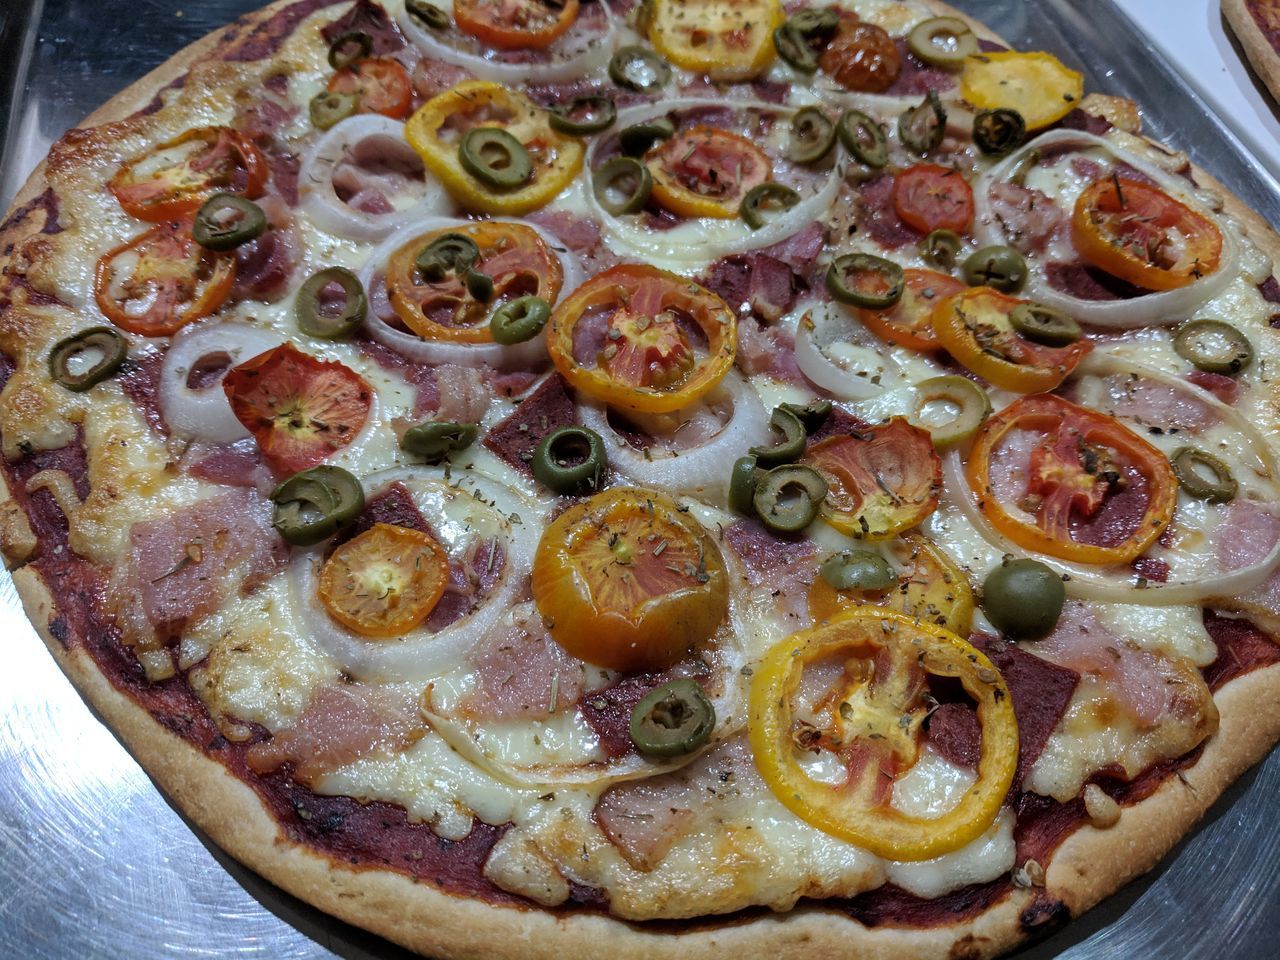 CLOSE-UP OF PIZZA ON TABLE